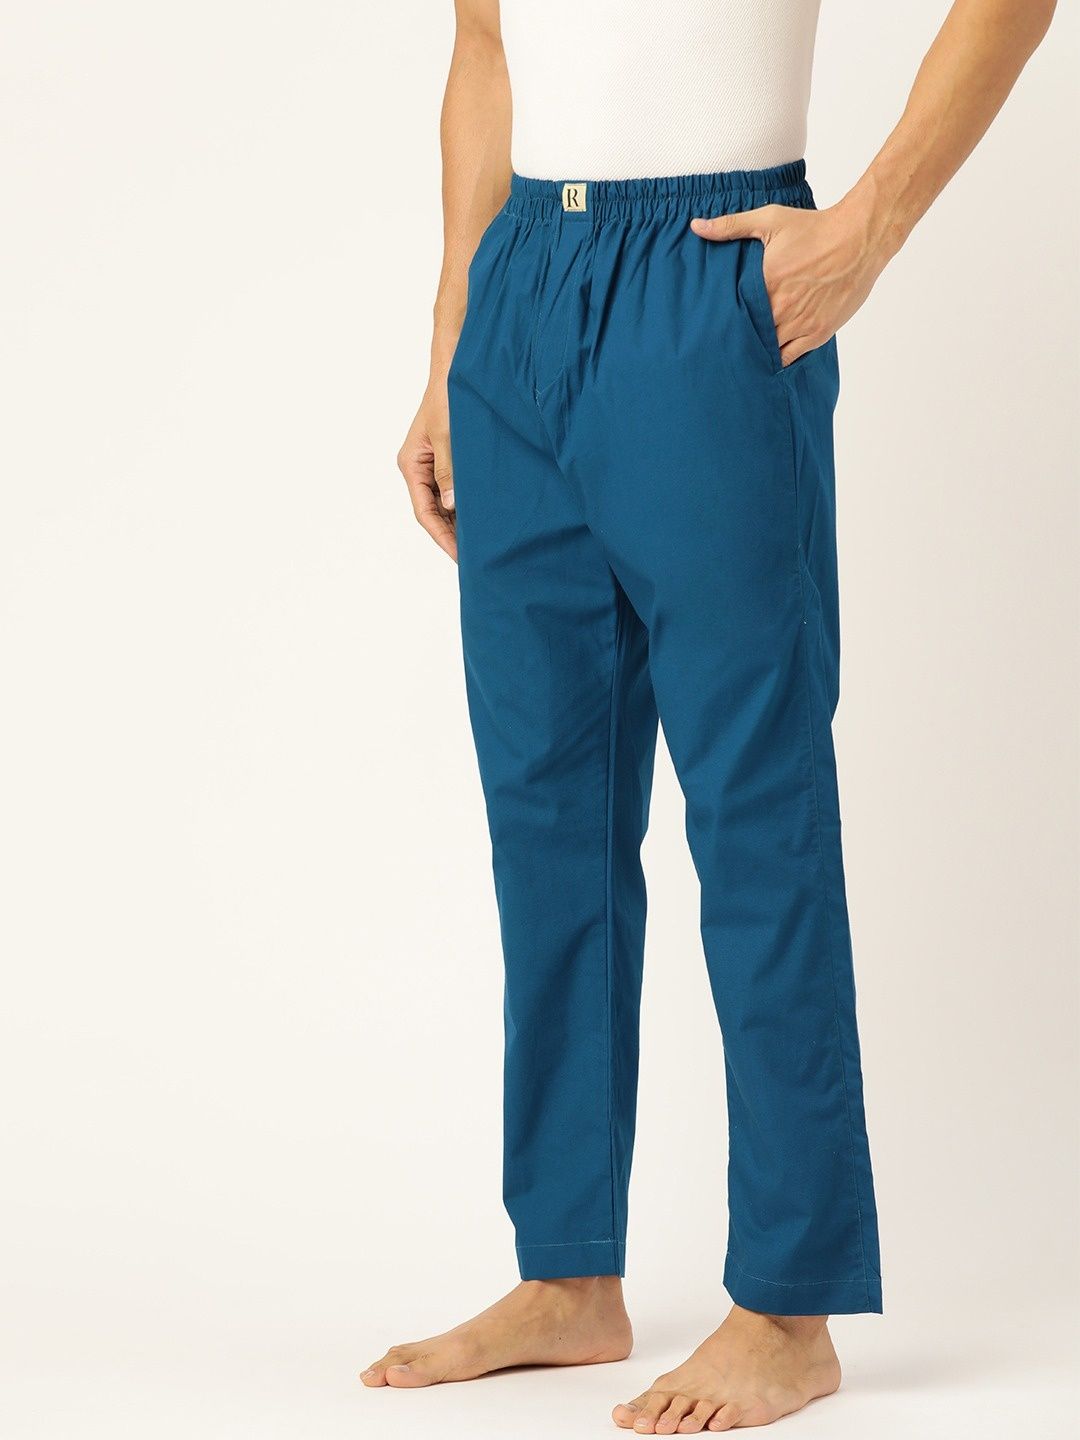 Morpich Pure Cotton Elastic Lounge Wear Pajama Pant Online In India ...